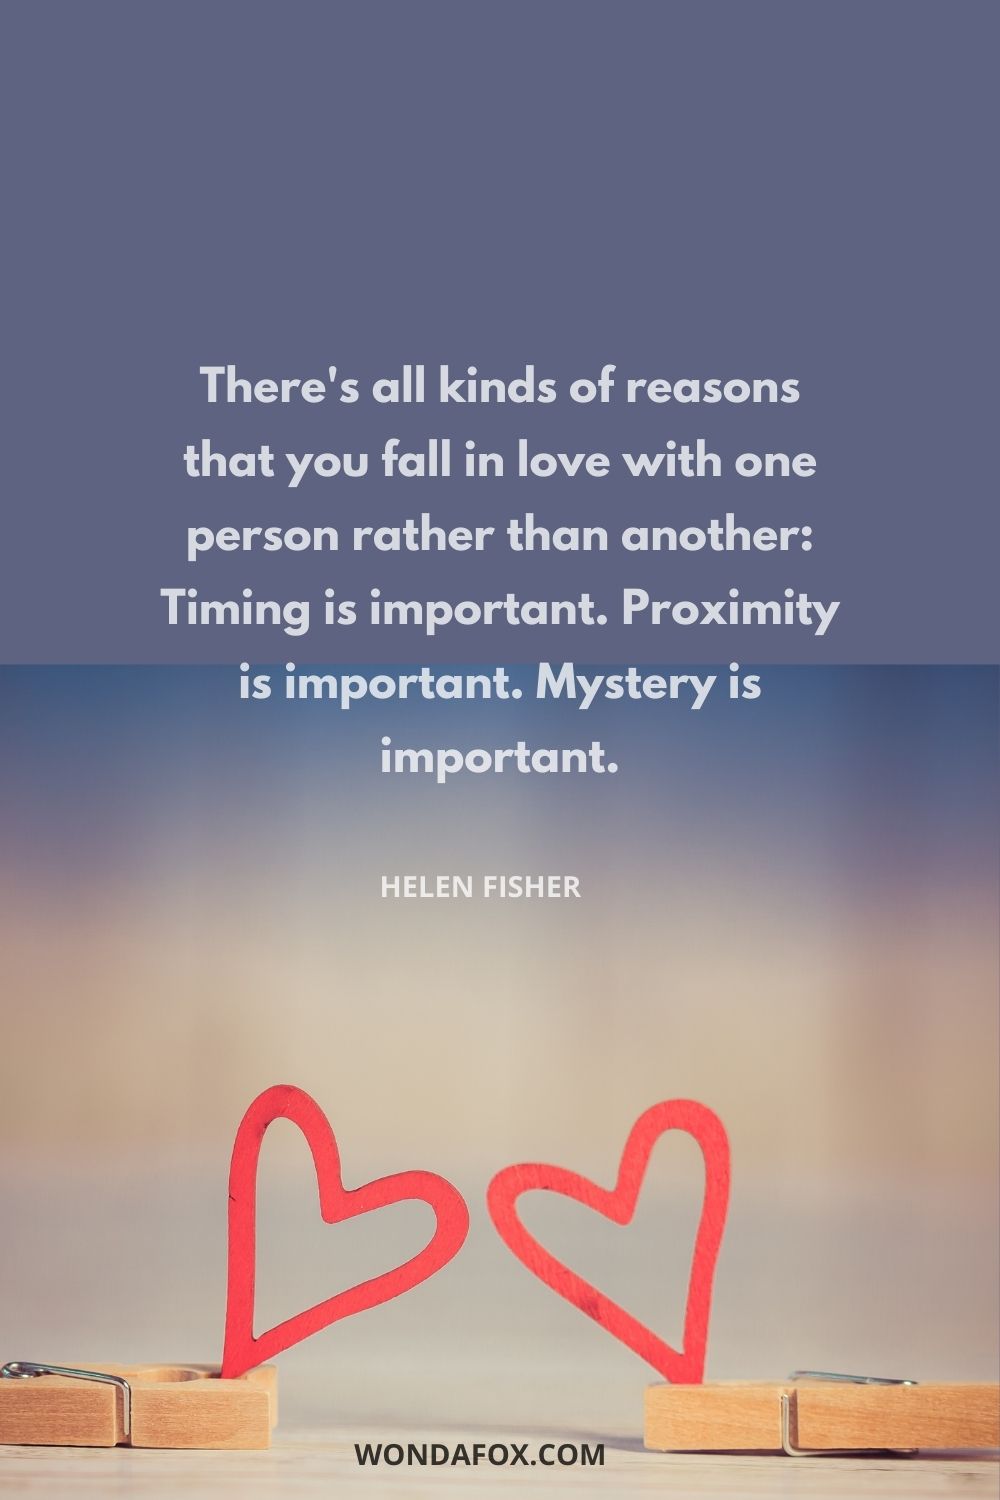 There's all kinds of reasons that you fall in love with one person rather than another: Timing is important. Proximity is important. Mystery is important.